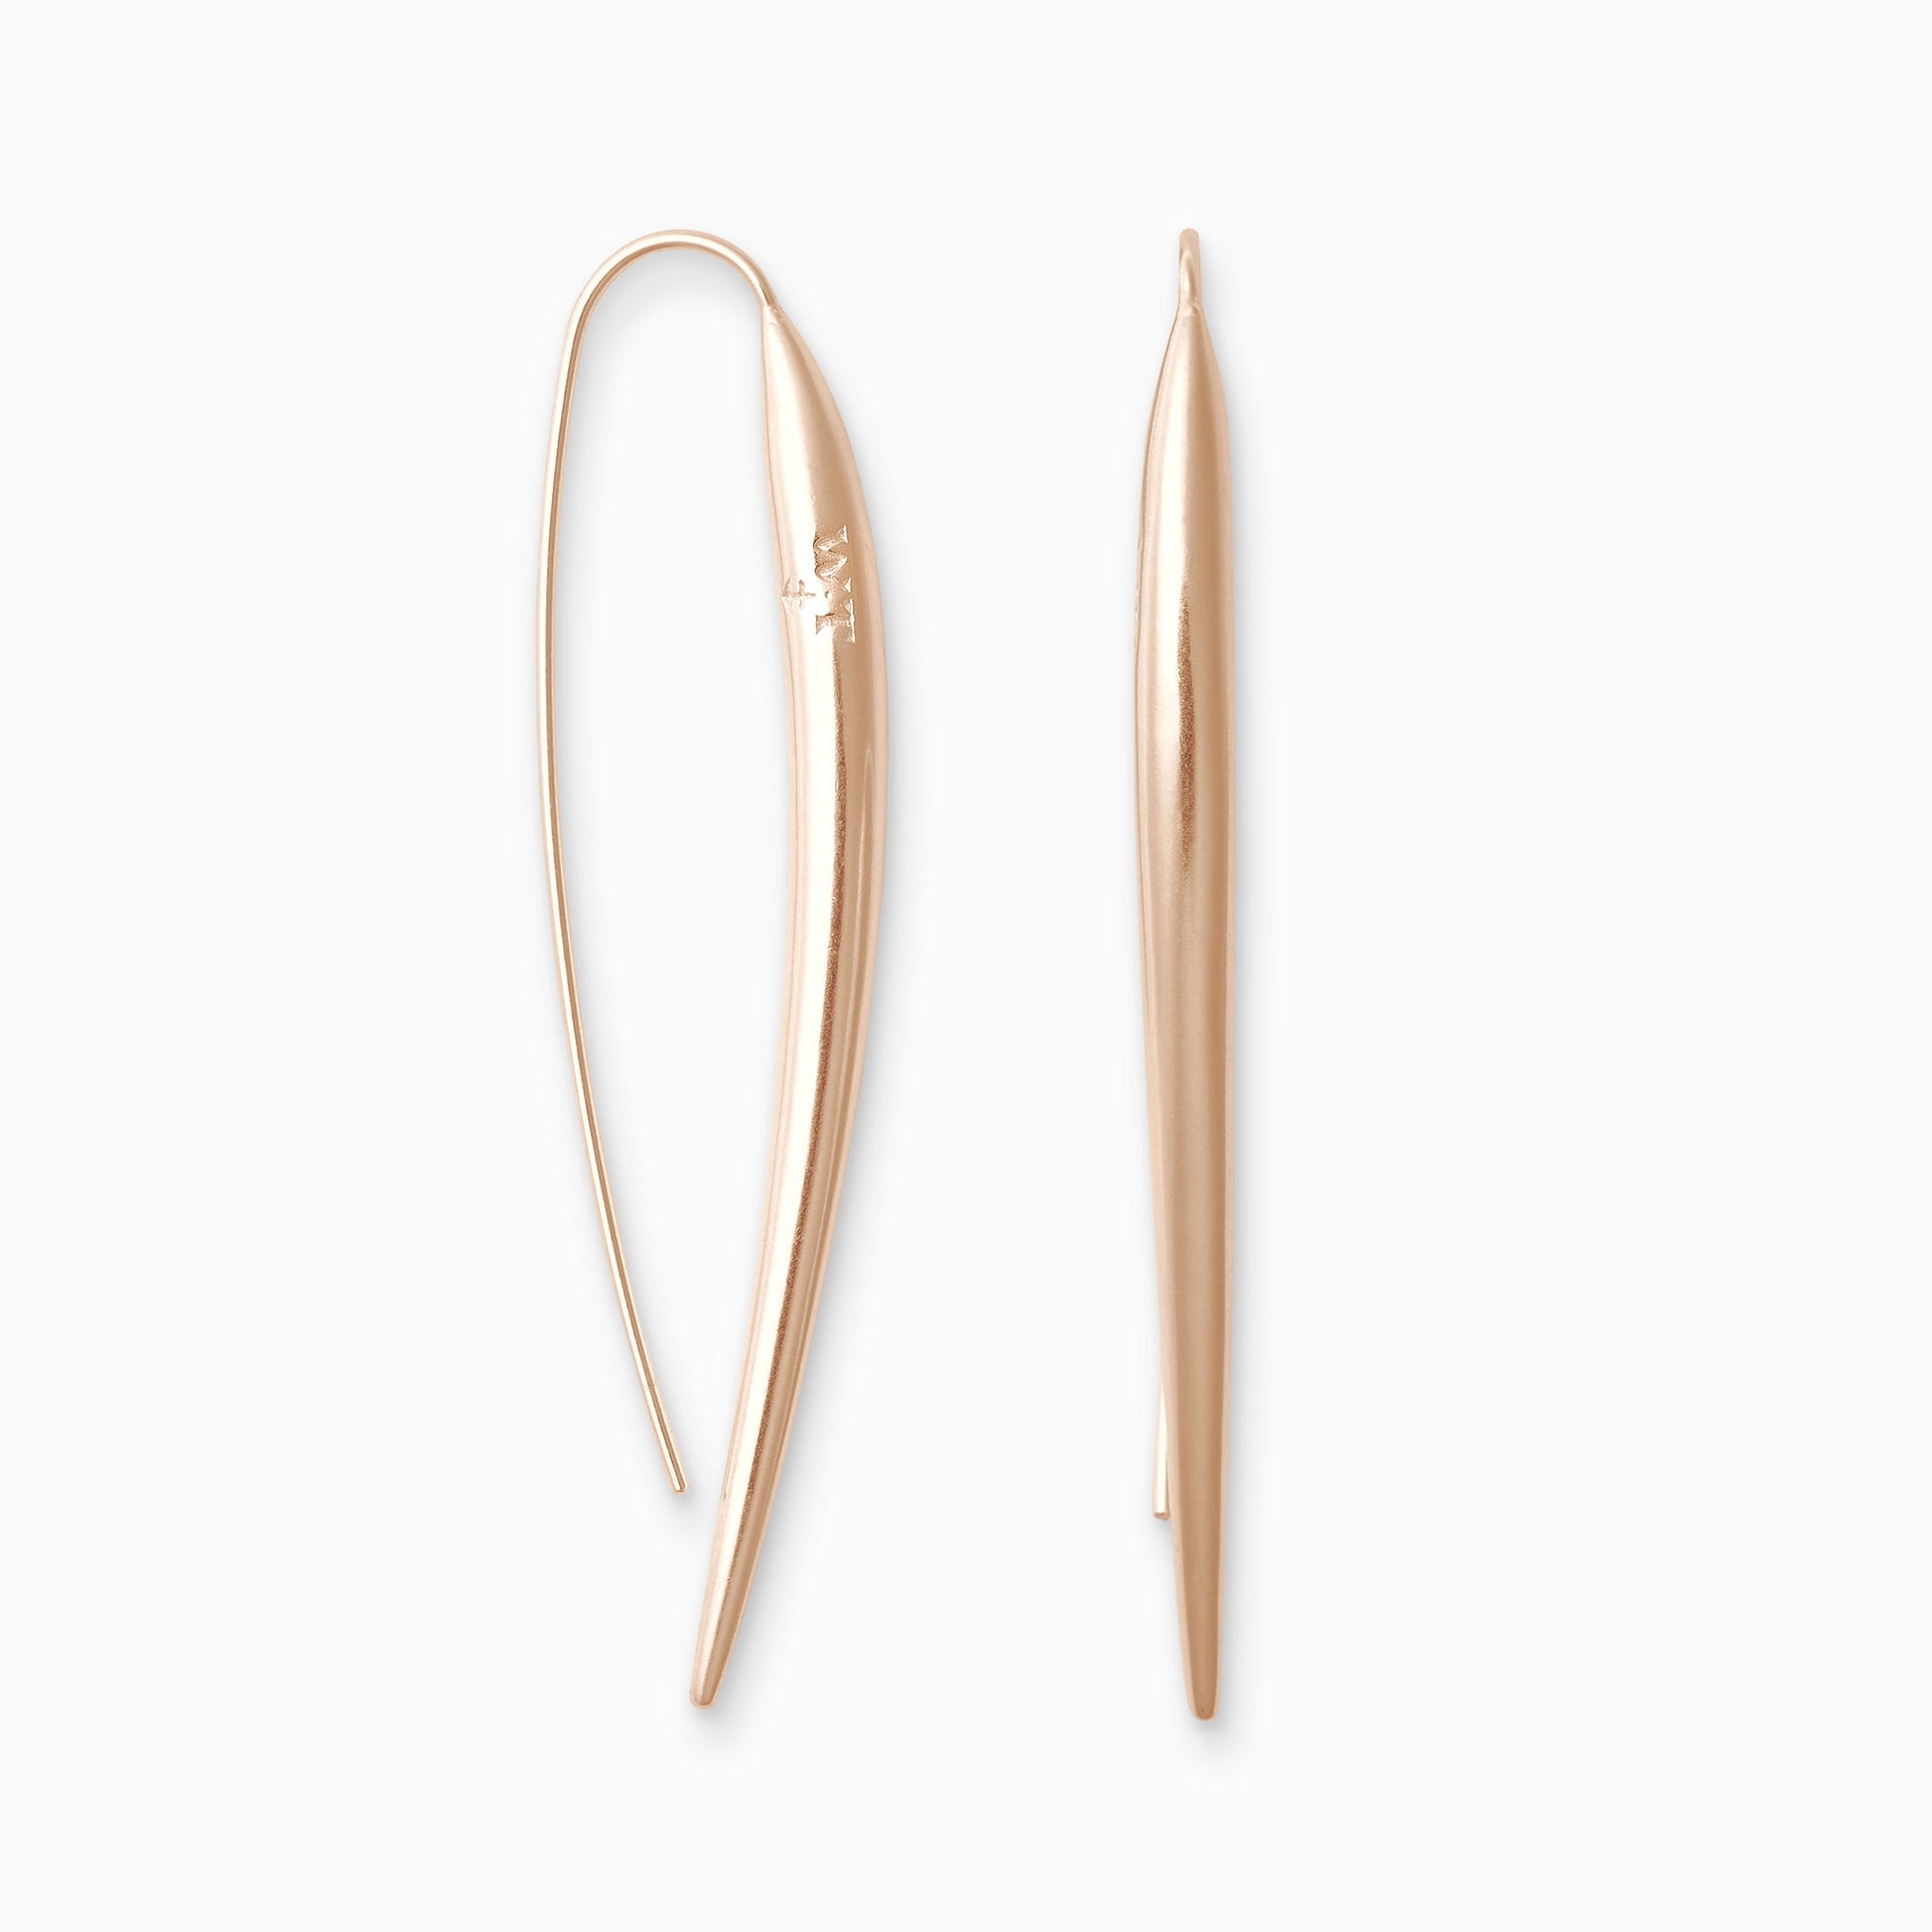 A pair of 18ct Fairtrade rose gold long slender shiny earrings with a hook fastening. 65mm length, 4mm diameter